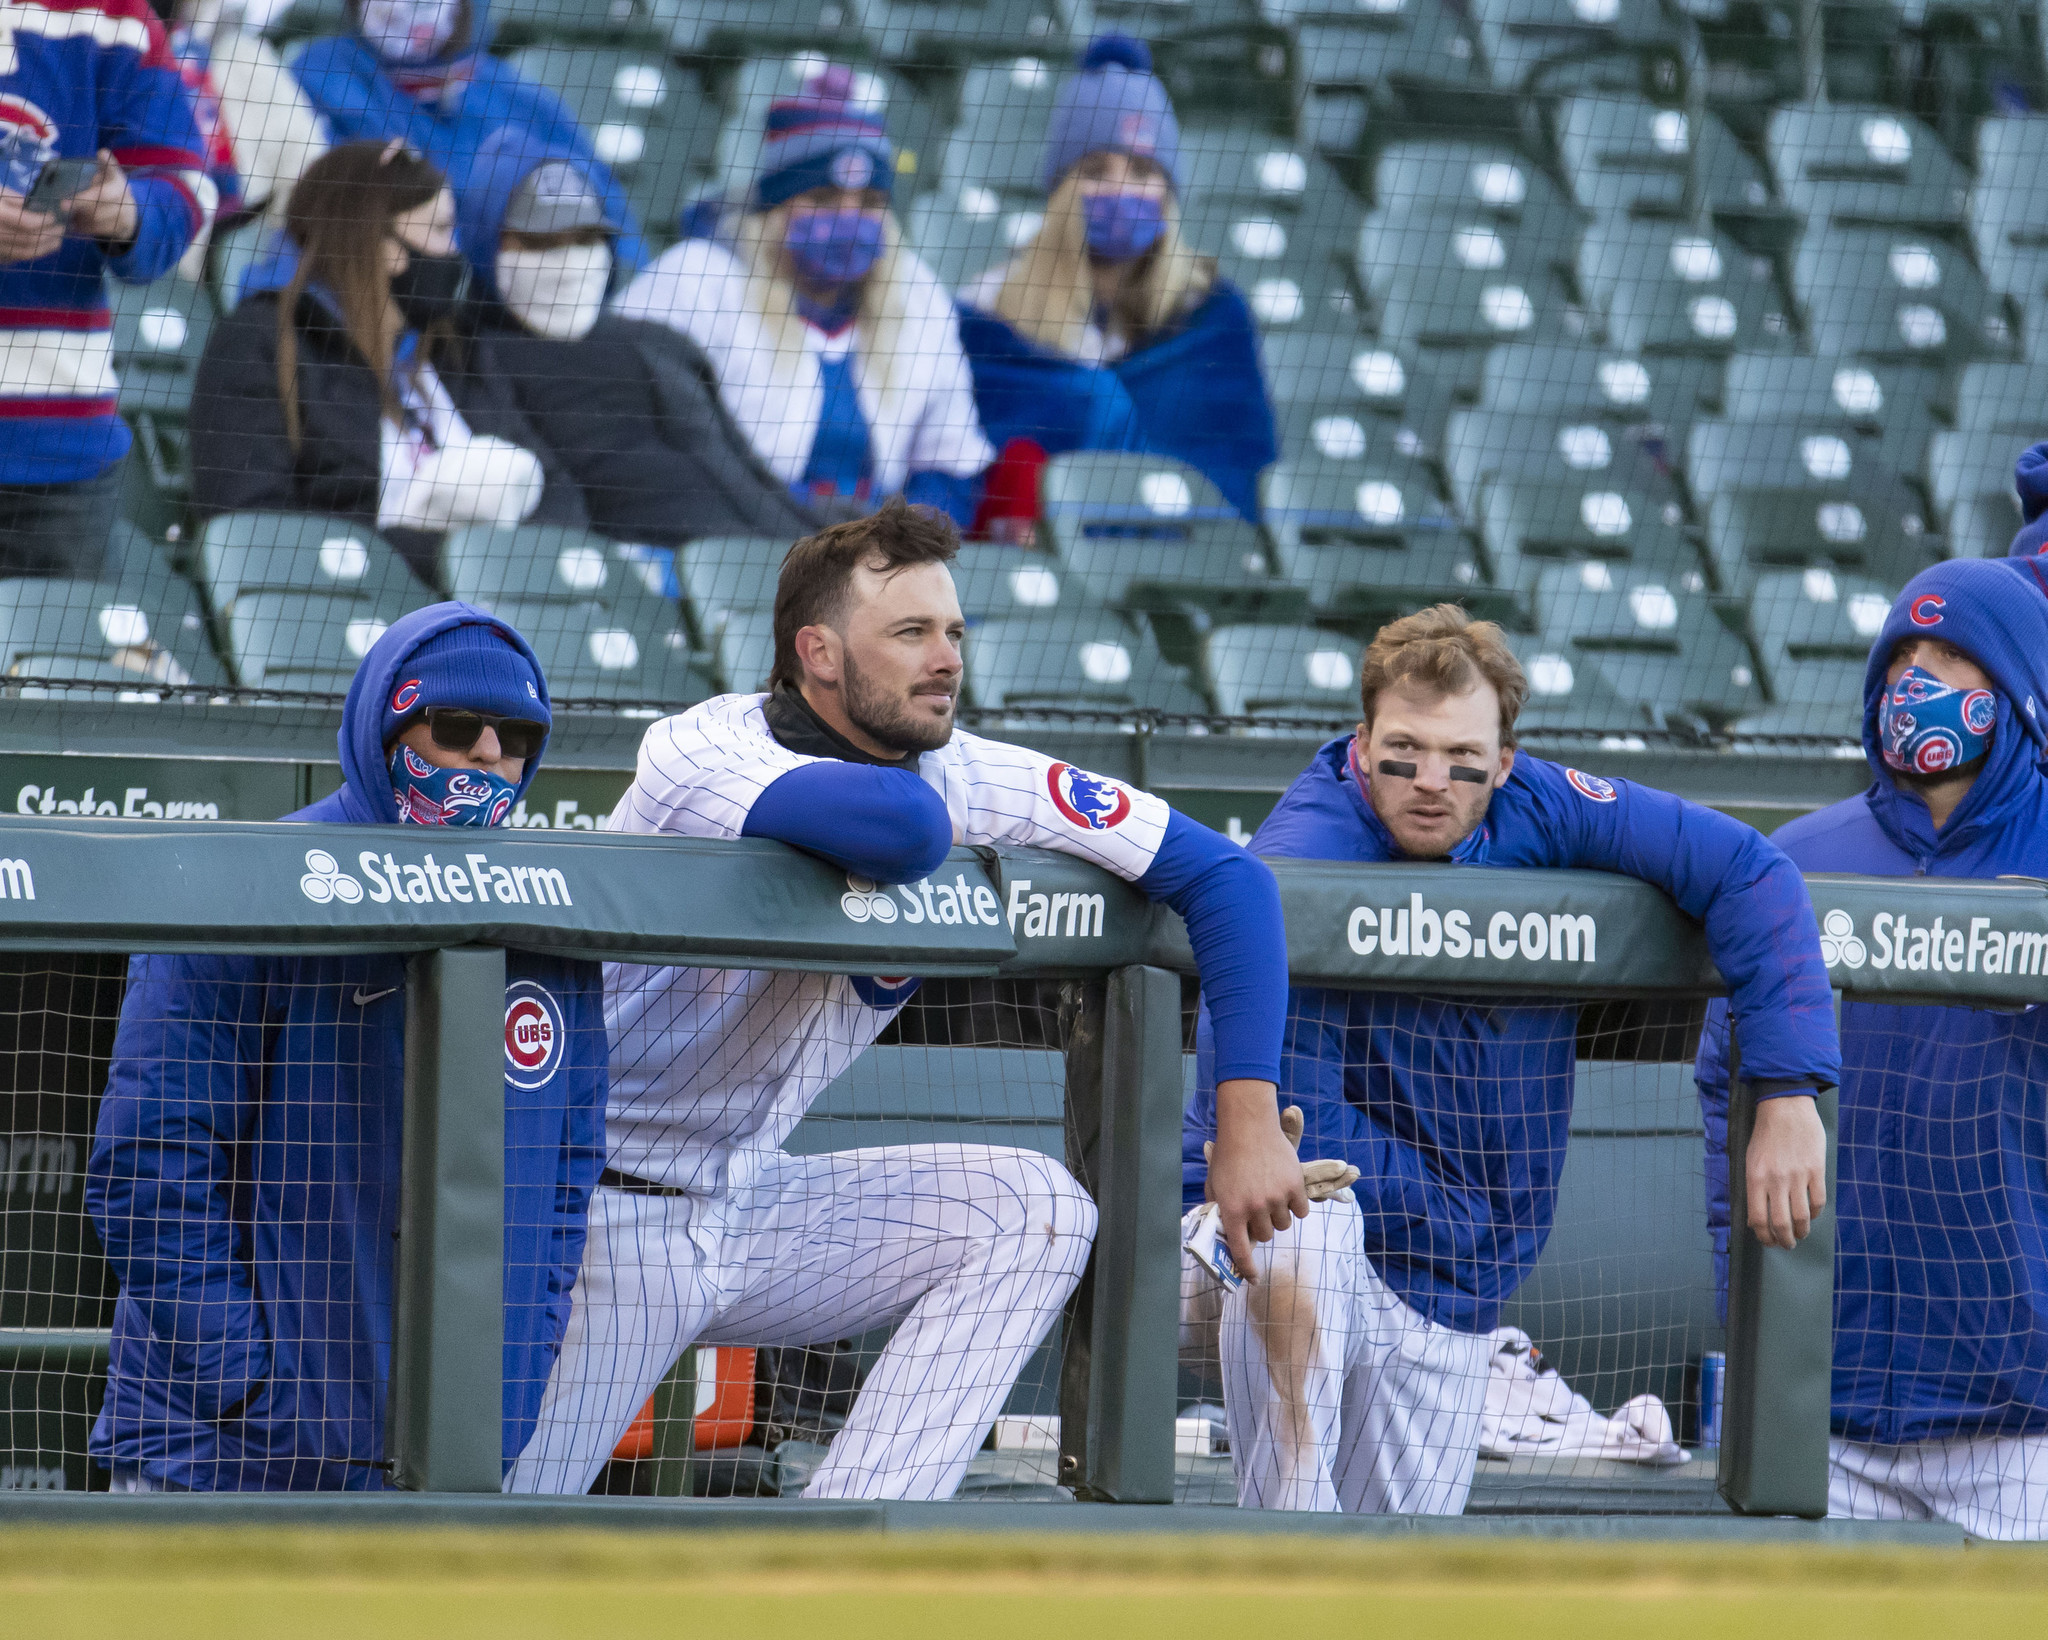 Despite Nickname 'Grandpa', Cubs' Ross Not Ready For Old Folks Home